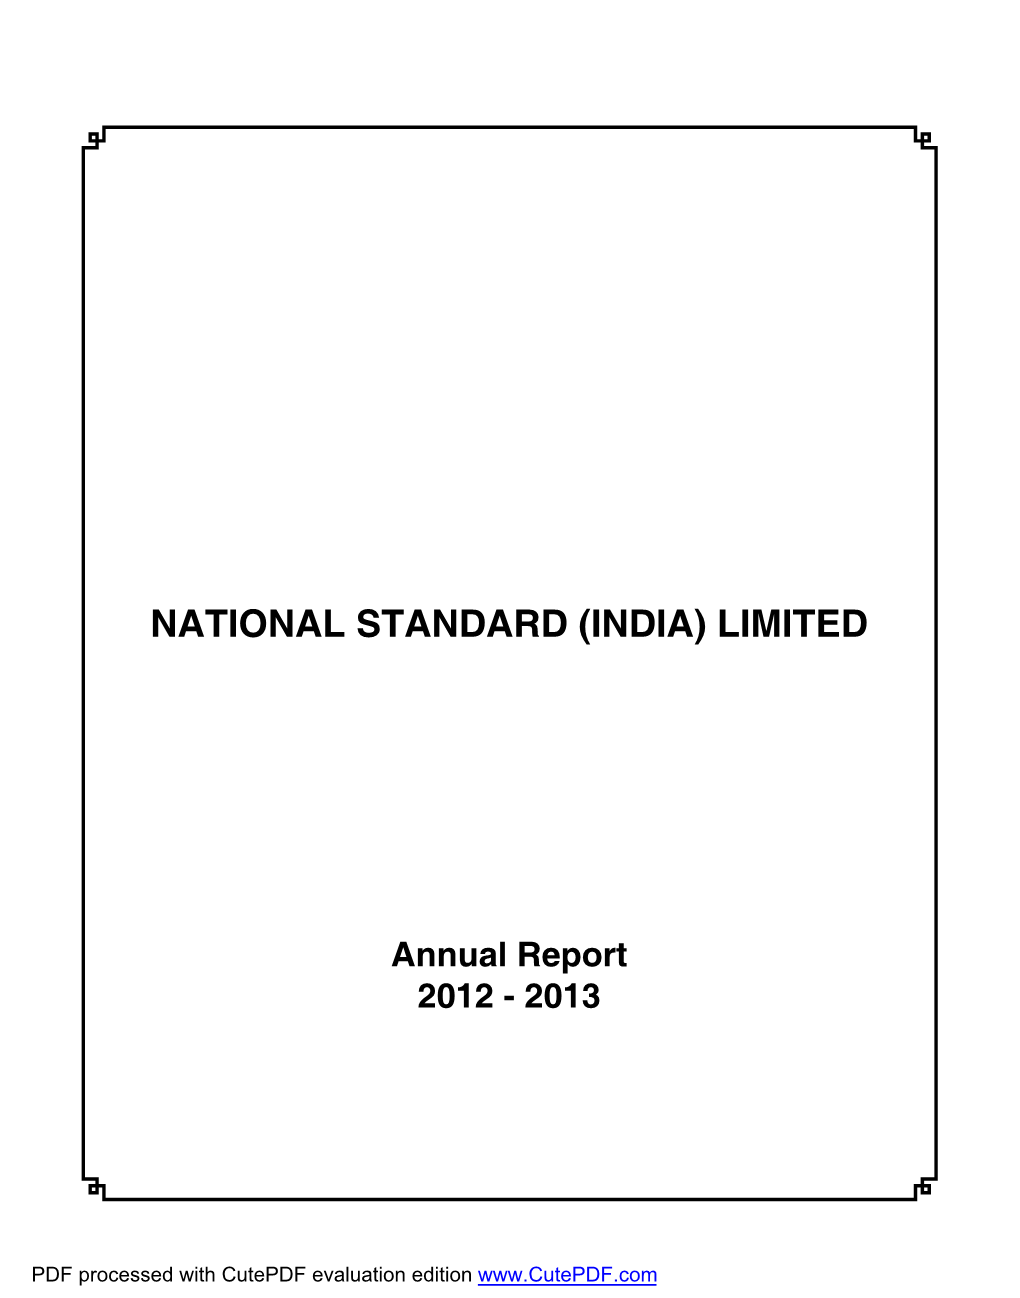 National Standard (India) Limited